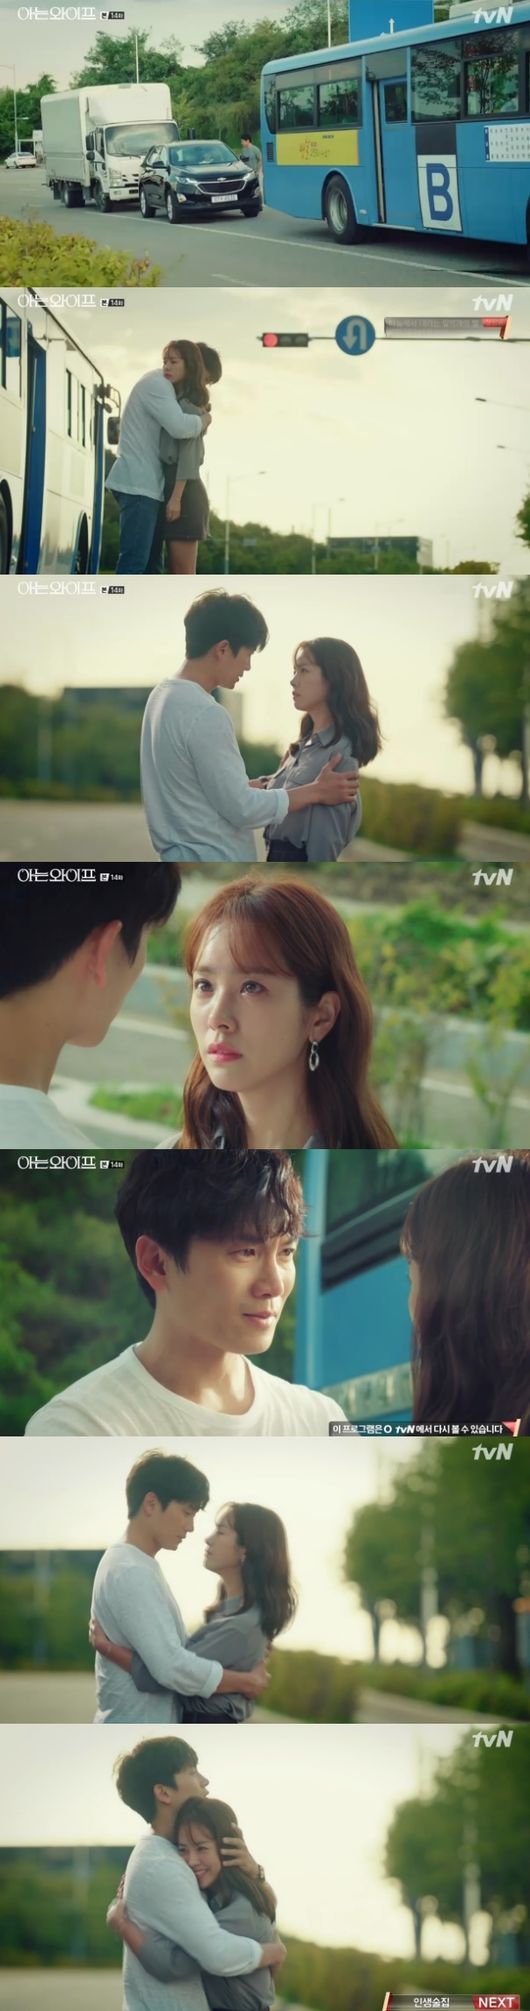 Knowing Wife Ji Sung blocked Han Ji-mins accident and made love Confessions.On TVNs Knowing Wife, which was broadcast on the afternoon of the 13th, Cha Ju-hyuk (Ji Sung) was shown blocking a bus crash to save Seo Woo Jin (Han Ji-min).Earlier, Cha Ju-hyuk and Seo Woo Jin returned to 2006 on the day of fate and opened their eyes.Seo Woo Jin searches for Cha Ju-hyuk, who did not appear at the first meeting place, but Cha Ju-hyuk was busy avoiding it because he was afraid to hurt Seo Woo Jin again.To Cha Ju-hyuk, who is trying to get away from himself, Seo Woo Jin has sincerely conveyed his heart.The pair are back in 2018 as Cha Ju-hyuk collapsed with a sea wo Jin who was nearly hit by a motorcycle.The present was different now that the past Choices had changed.Seo Woo Jin mother was healthy and winning as a sales king, and Yoon Jong-hoo (Jang Seung-jo) married her first love as originally destined and became a twin father.But Cha Ju-hyuk was different: he lived in isolation from the world with a heart of atonement, suffering from people becoming unhappy with his Choices.Seo Woo Jin struggled to get back to such Cha Ju-hyuks side.Back at World Bank with Cha Ju-hyuk, Seo Woo Jin followed him around.Cha Ju-hyuk hid in the bathroom to avoid such a Seo Woo Jin, but was confronted at a bus stop.Cha Ju-hyuk asked, Why can I meet a better man and be happy? And Seo Woo Jin said, I am sorry for this.I think Ive had a happy life because you changed our destiny, or I think youve been living with evil all your life.This time I will bail you out, he said.Cha Ju-hyuk said, You did not meet me and lived well, I am unhappy with you. Sea Woo Jin said, I can live well together from now on.Cha Ju-hyuk pushed Seo Woo Jin, but worried about Seo Woo Jin, who was busy because of World Bank work and could not eat lunch properly.Also, when Seo Woo Jin was confronted with World Bank customers, he was hit by a piggy bank wielded by a Marida customer instead, and Yun Jong-hoo told Cha Ju-hyuk, What are you?The guy who does not even come to such a situation was like a bodyguard before. Cha Bong-hee (Son Jong-hak), branch manager of World Bank, suggested, Ill give you a blind date for the car, and Cha Ju-hyuk refused, I dont have any thoughts; Im really fine, Ill take it in my heart.Cha Bong-hee continued to suggest, Do you think youre going to get a dropout? Cha Dae-ri is still fine. Be confident, but Cha Ju-hyuk did not accept it.When Cha Ju-hyuk left for work, World Bank colleagues tried to push for a blind date, saying, Create a seat by chance, I am in favor, and Just do it?So, Seo Woo Jin said, I am the opposite. It is not the other problem, but it is the privacy problem to push the problem of men and women so much.I am in love with Cha Dae-ri. I am a real real. Asked what side of the car is good for him, Seao Woo Jin said: Hes handsome, people are nice and sometimes shy and like this: they have a good voice, and their eyes are sexy.I think it will be sucked in. When I consult with customers, my shoulders are widening and I am sexy and sexy. Peers cheered on the public Confessions of Seo Woo Jin, and later decided to actively push Seo Woo Jin and Cha Ju-hyuk.But Cha Ju-hyuk was heavily bubbly as World Bank colleagues continued to weave him and Seo Woo Jin, and chilled the dining mood.Seo Woo Jin said, Wouldnt it be so straight? I thought I could try. But I thought, Are you bothering your agent?I want to ask you one last time: cant you really do it?Cha Ju-hyuk did not respond, and Seo Woo Jin said: I get it, if its that hard Ill give up, I think it was too unilateral, Im sorry.Lets just live our lives. Seo Woo Jin, whose relationship with Cha Ju-hyuk became uncomfortable, tried to move his job to Hong Kong World Bank, and Cha Ju-hyuk said, It seems to be a good opportunity.Shortly afterward, Cha Ju-hyuk, who anticipated a collision between bus No.170 and freight Mitsubishi Fuso Truck and Bus Corporation with Seo Woo Jin, tried to stop the accident by driving Yoon Jong-hus car instead.Cha Ju-hyuk stopped the bus and Mitsubishi Fuso Truck and Bus Corporation with one minute left in the accident, and fortunately prevented the accident.Cha Ju-hyuk held Seo Woo Jin and said, I know youre brazen, conscience, I dont know all the guilt, one thing is I love you so much.I will make you happy. I will keep that promise. Capture the broadcast screen for Knowing Wife